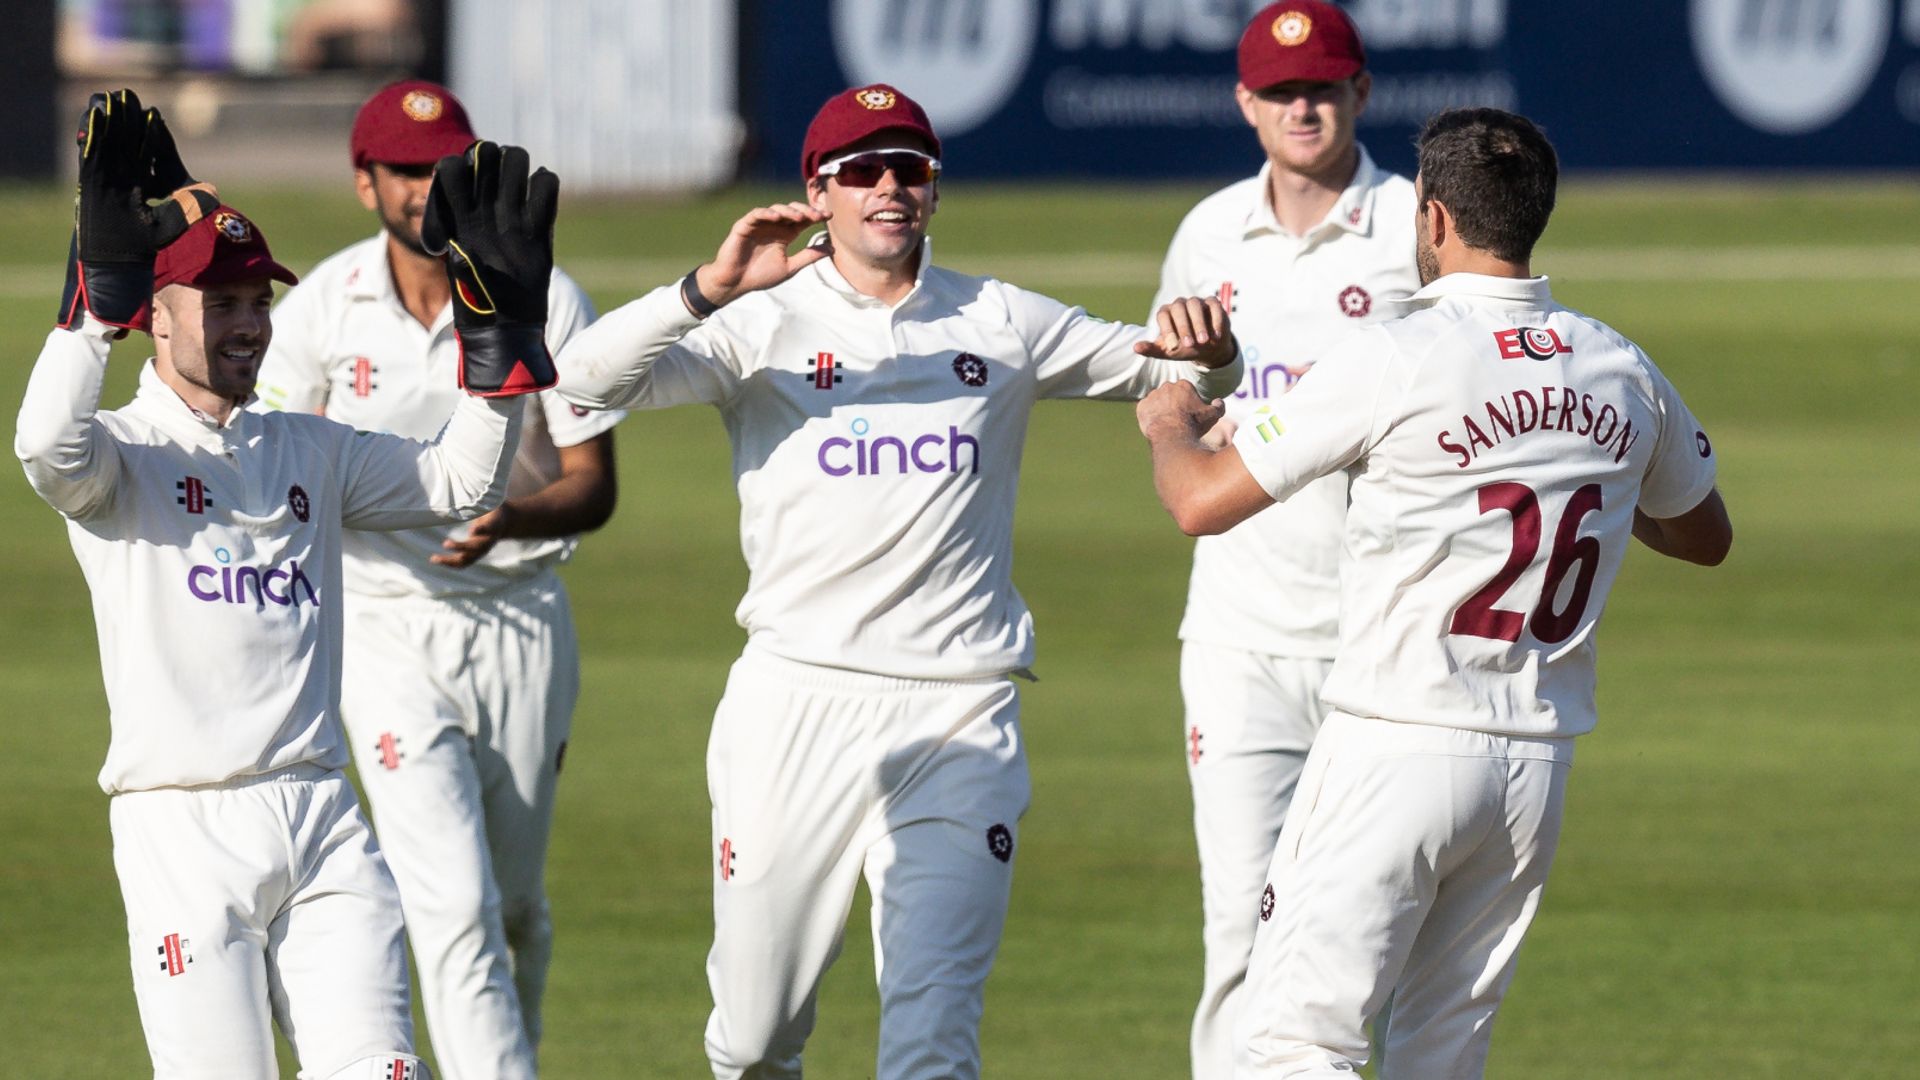 Essex's hopes of winning County Championship dented by Northamptonshire